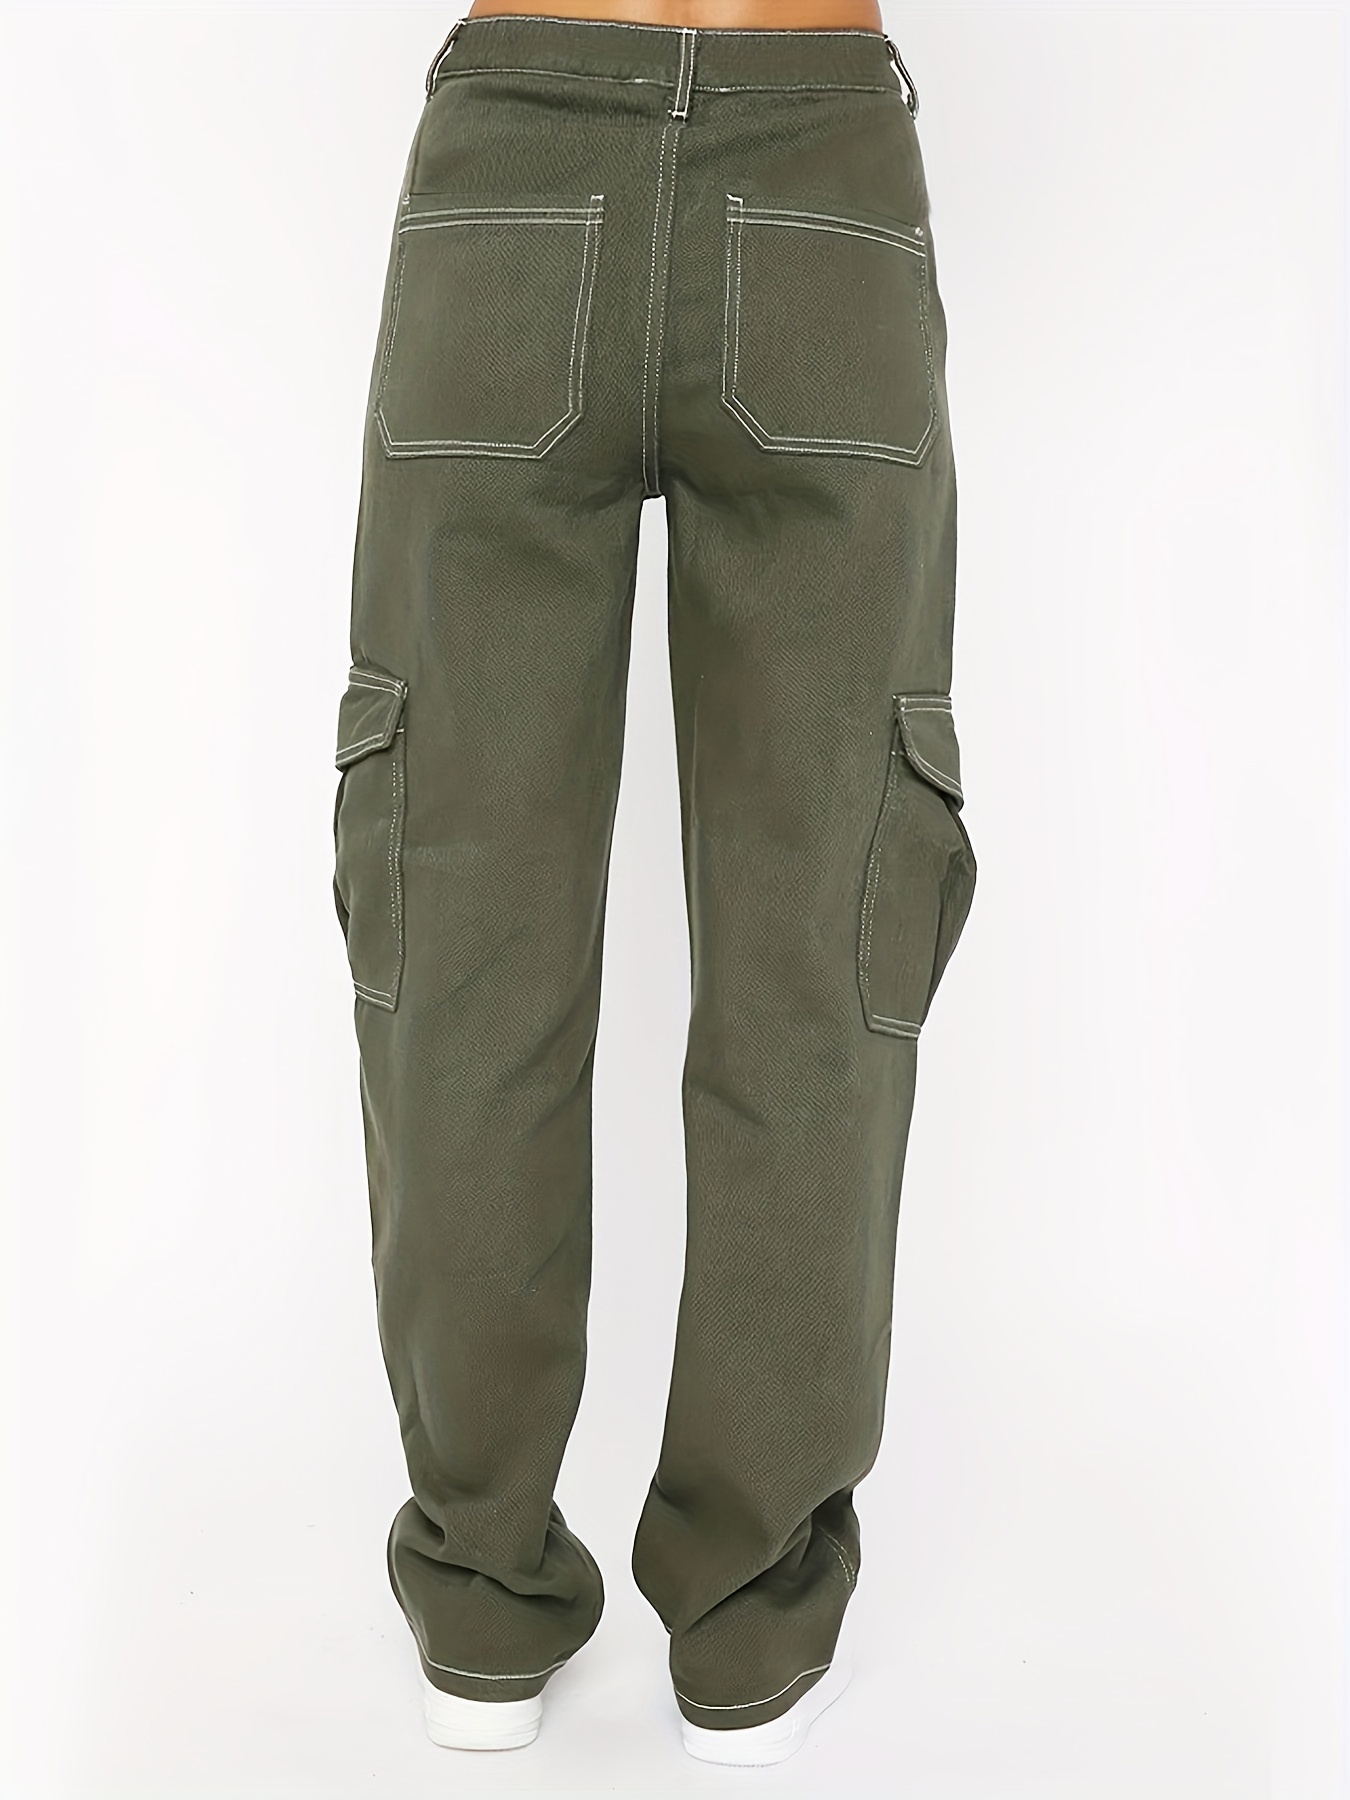 Army Green Cargo Pants, Flap Pockets High Waist Loose Fit Non